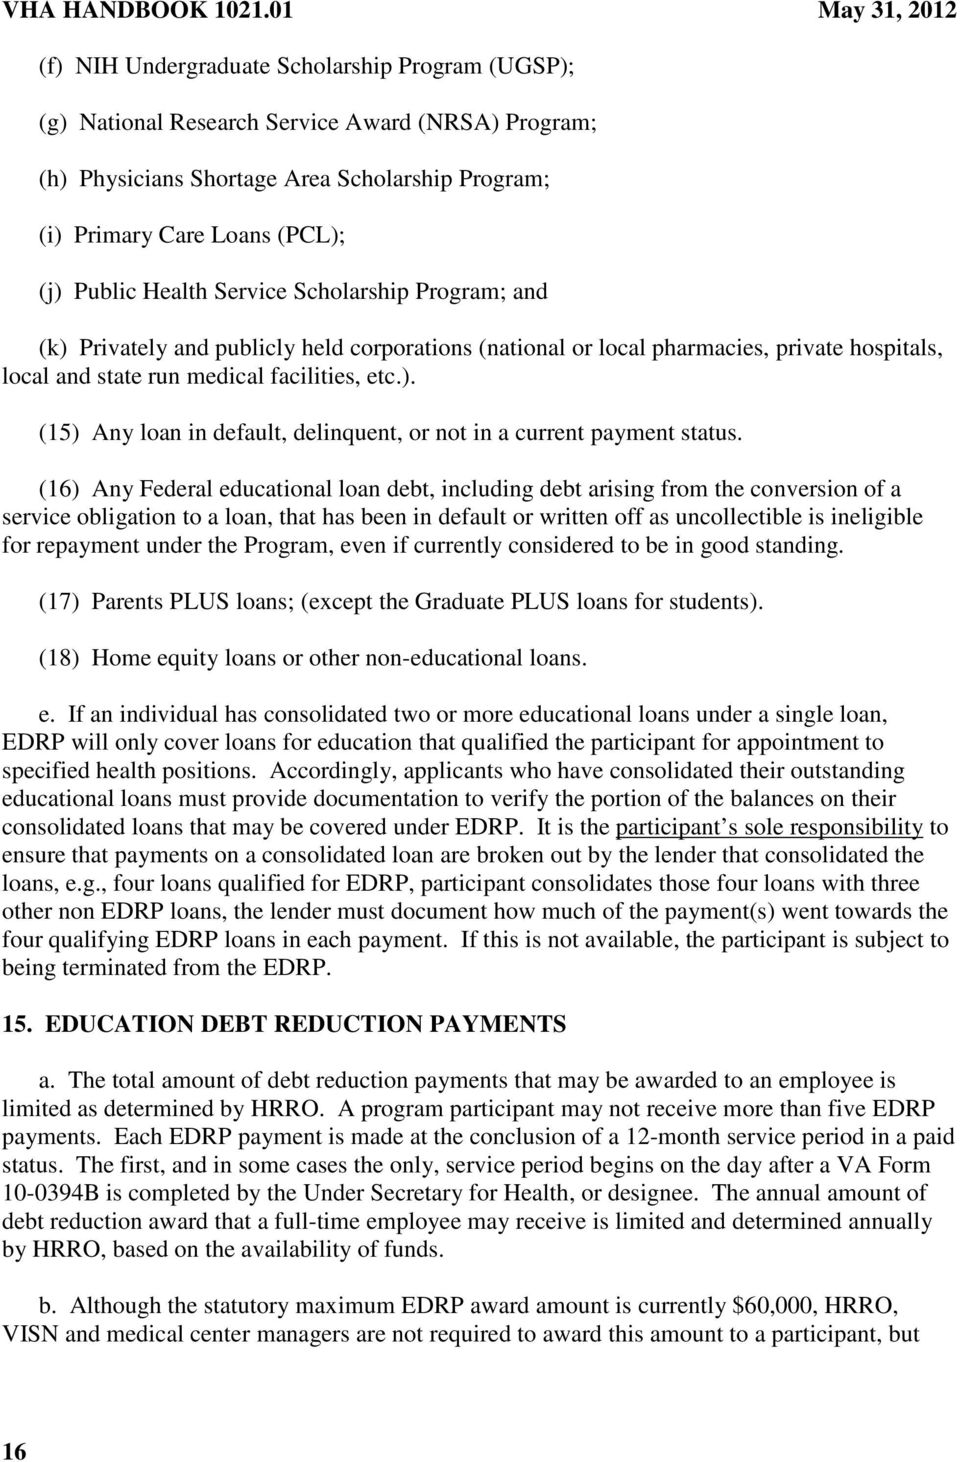 (j) Public Health Service Scholarship Program; and (k) Privately and publicly held corporations (national or local pharmacies, private hospitals, local and state run medical facilities, etc.). (15) Any loan in default, delinquent, or not in a current payment status.